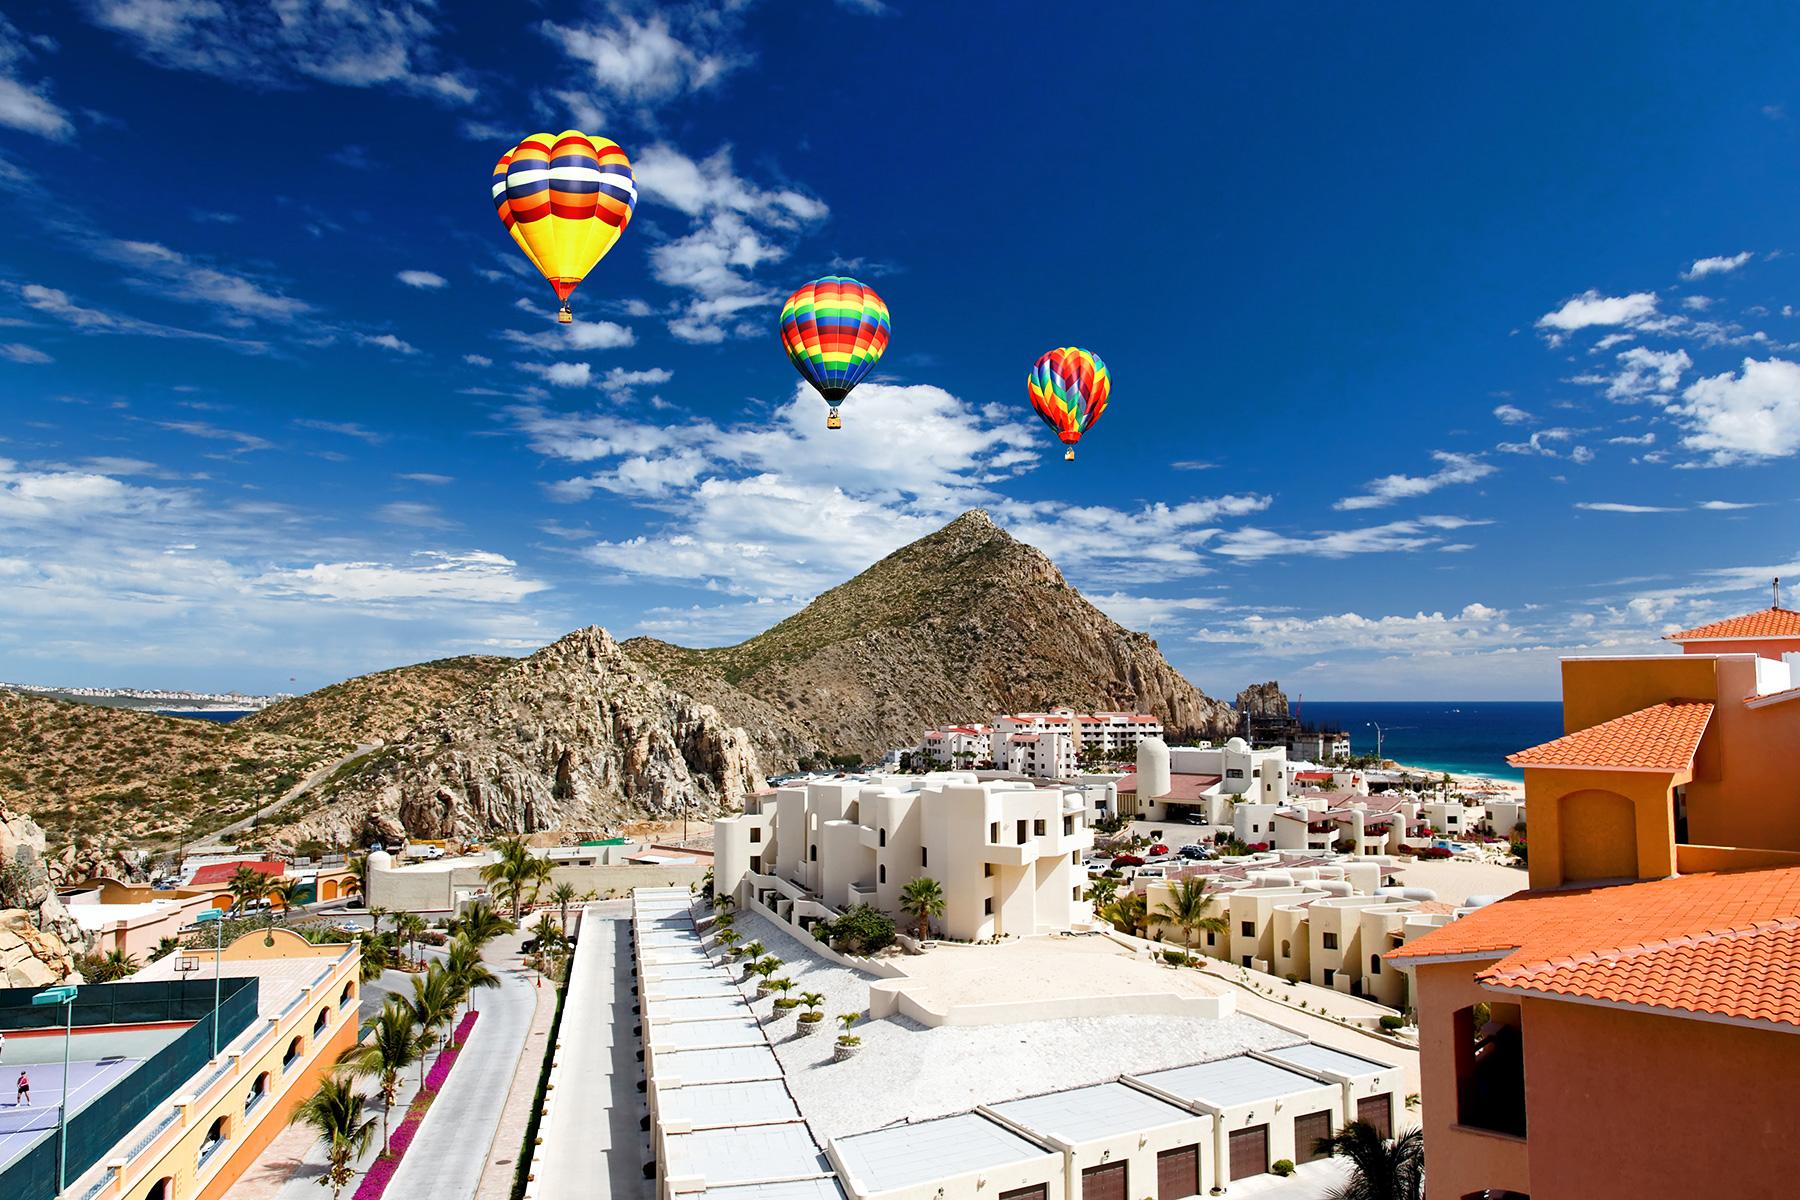 21 Fun Things to Do in Los Cabos